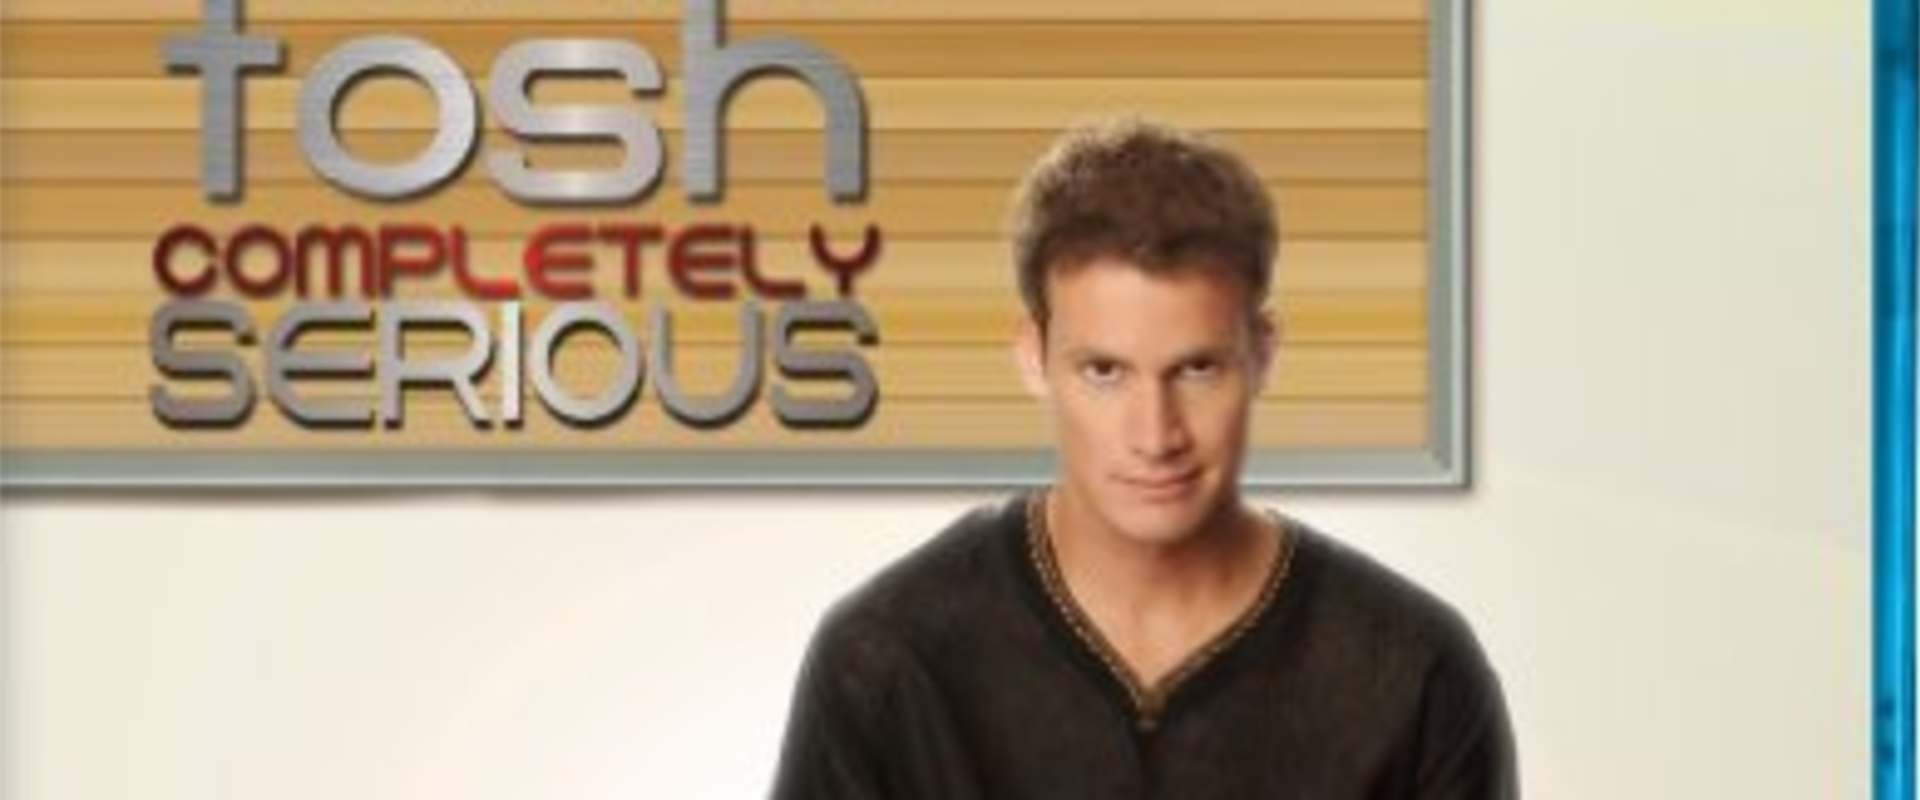 Daniel Tosh: Completely Serious background 1